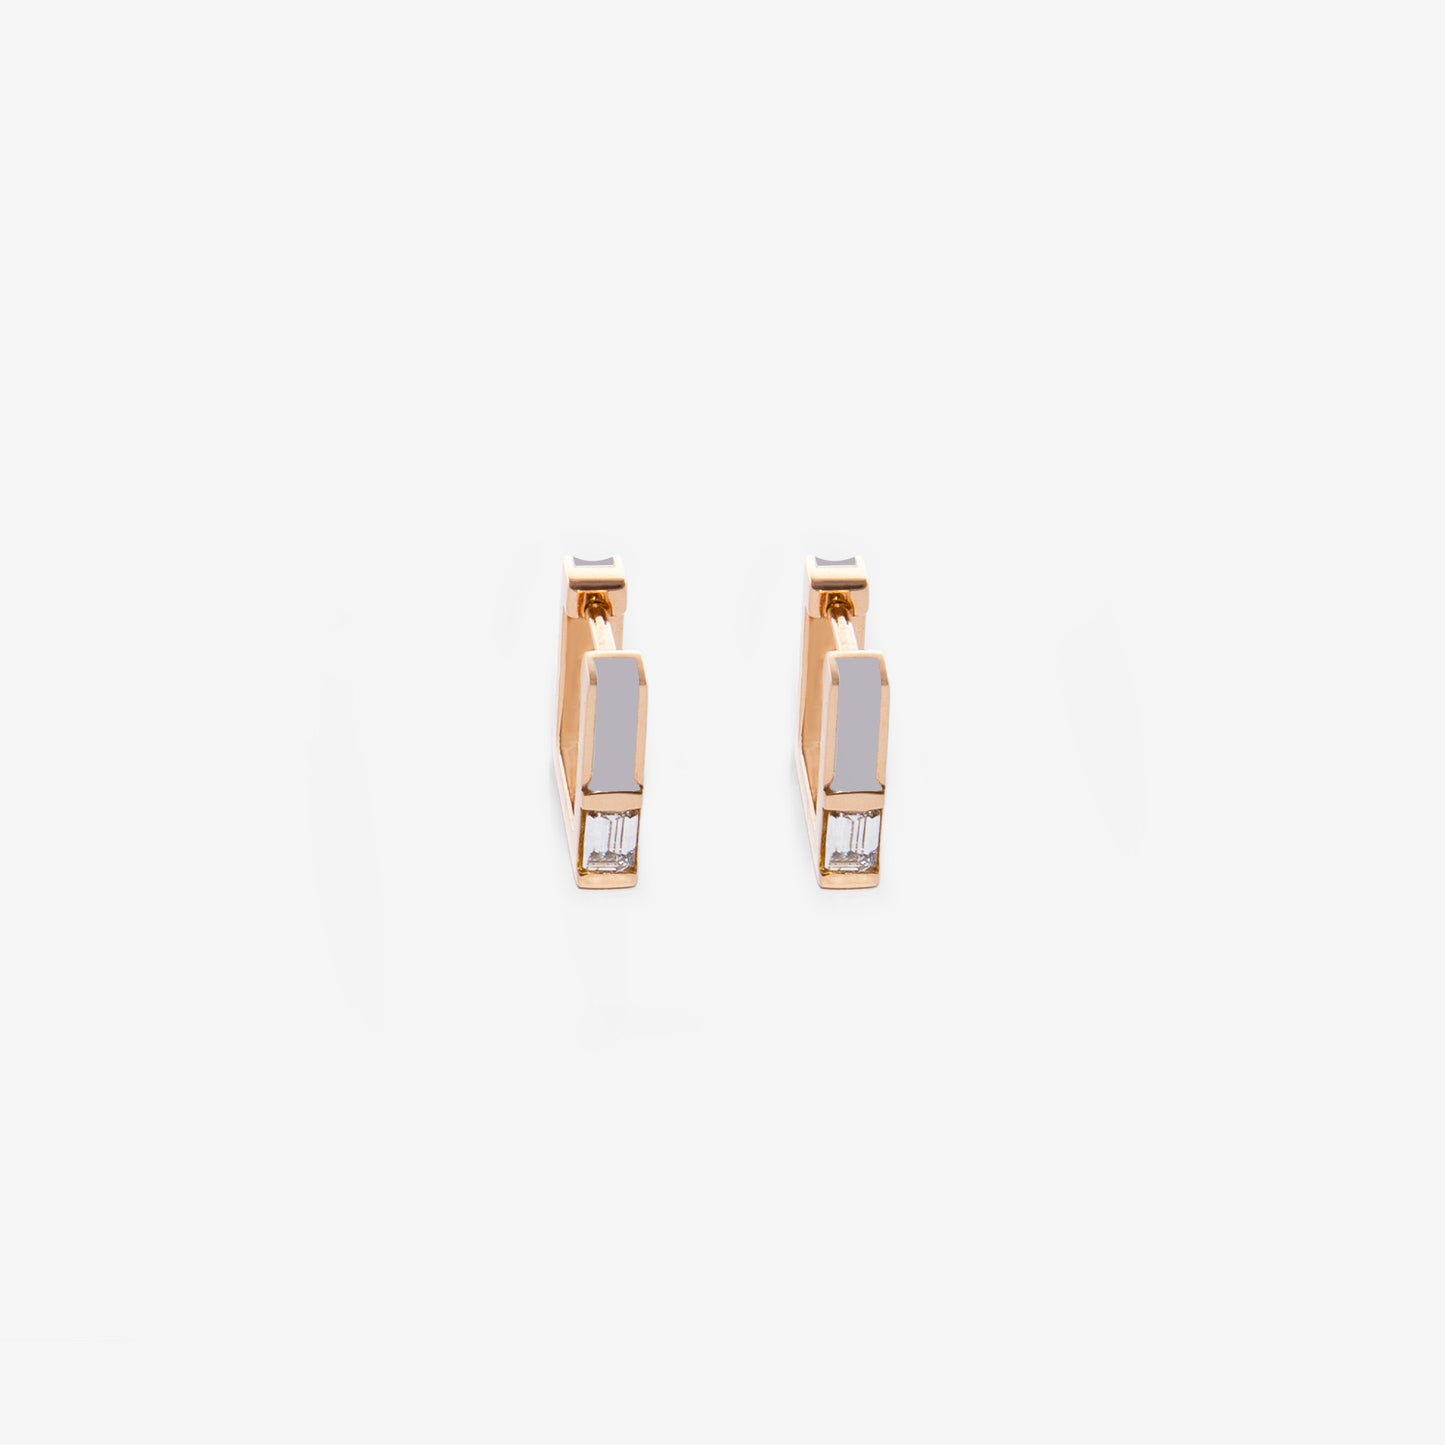 Square cool gray earrings with diamonds